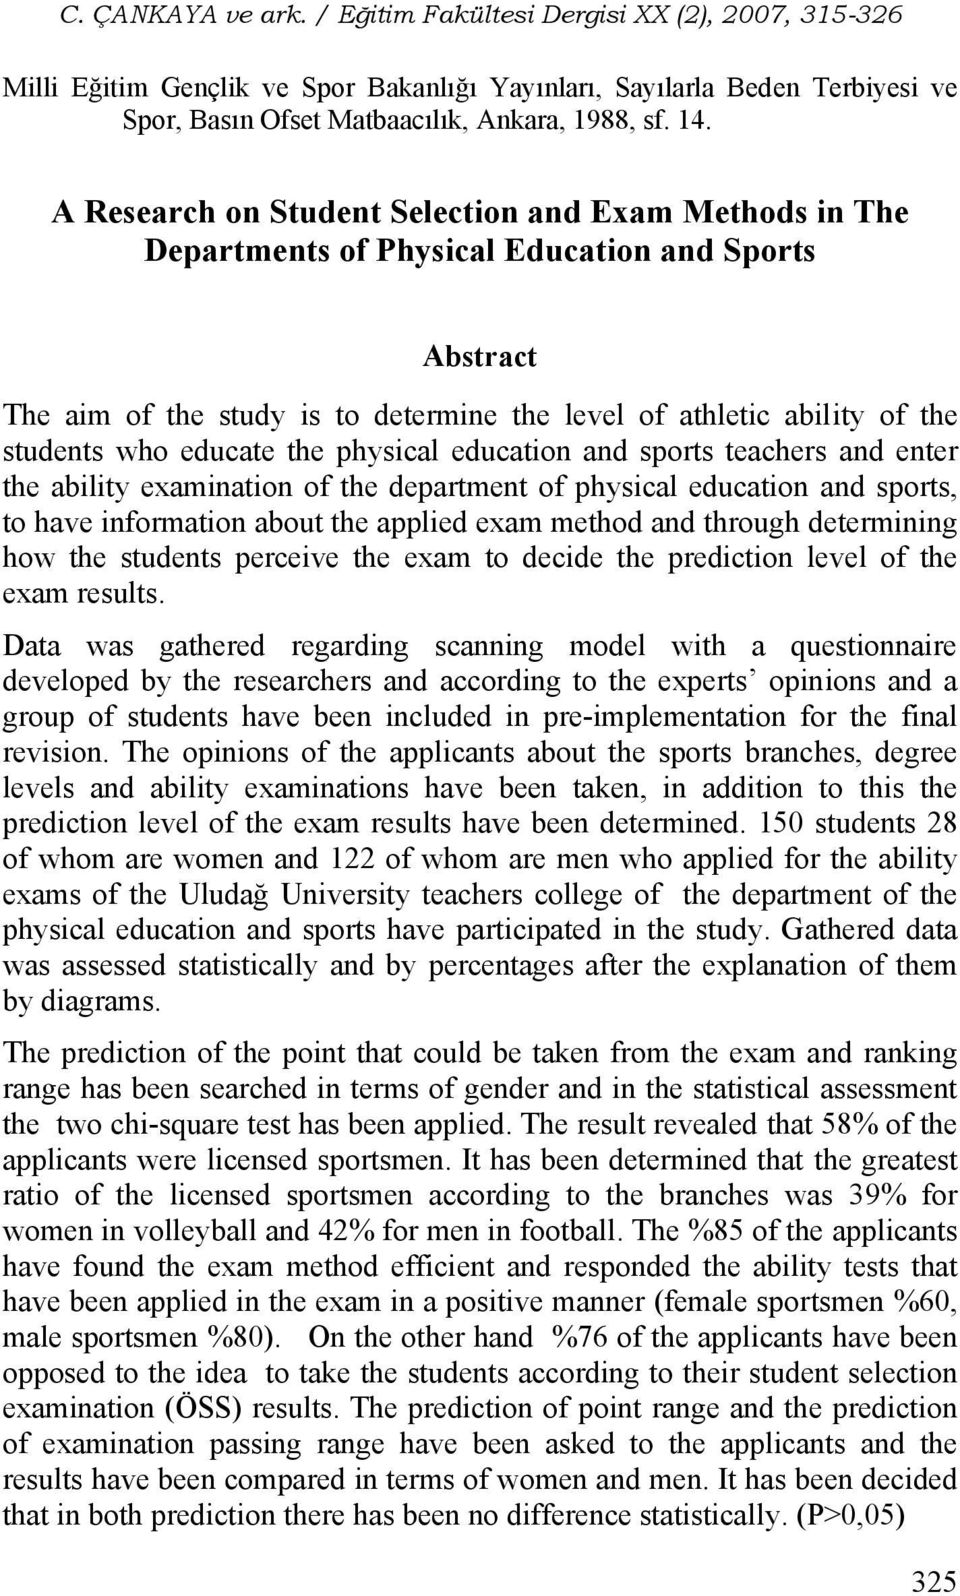 educate the physical education and sports teachers and enter the ability examination of the department of physical education and sports, to have information about the applied exam method and through